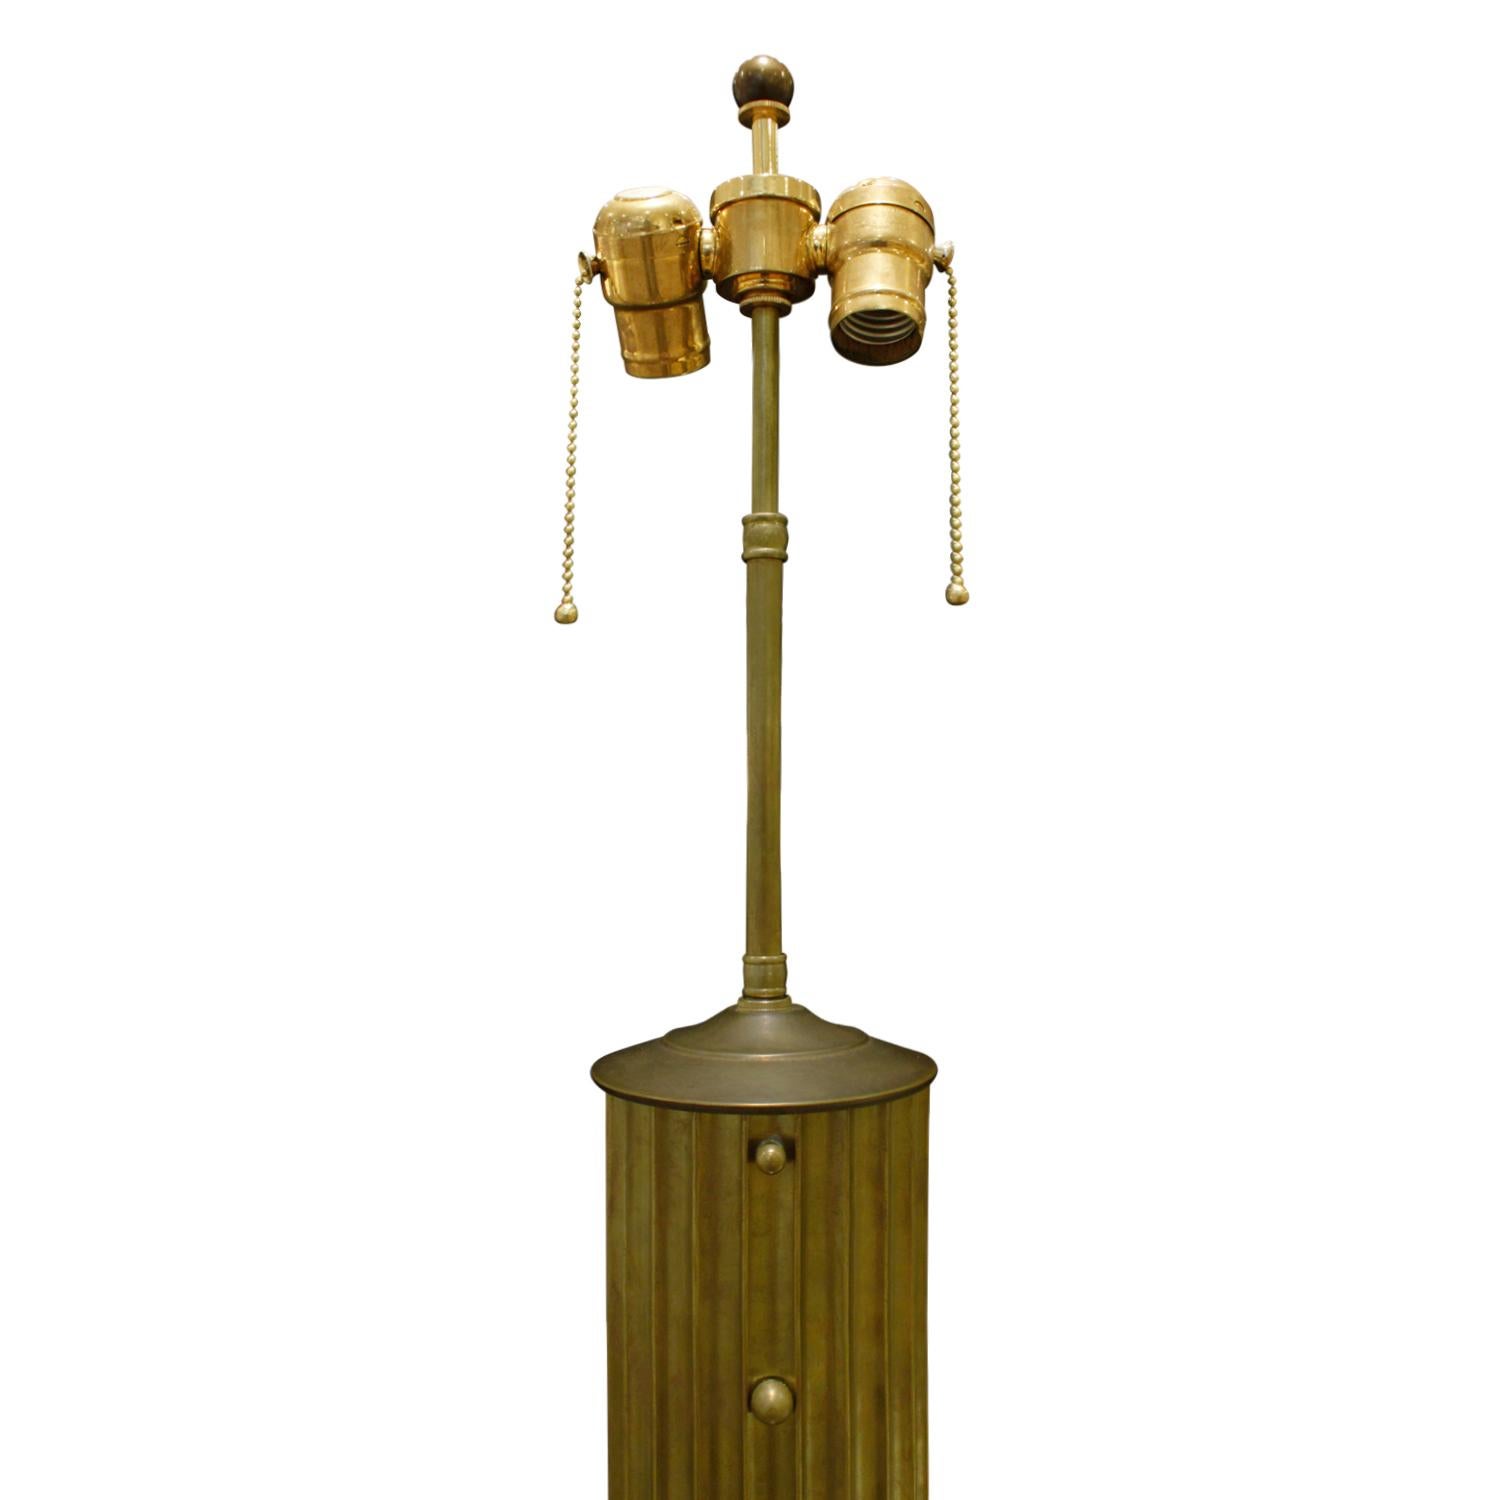 Fine fluted bronze column table lamp with ebonized wood base and custom shade, American 1940's. This lamp is beautifully made and very chic. 

Shade W: 16 inches
Shade D: 11.5 inches
Shade H: 14 inches